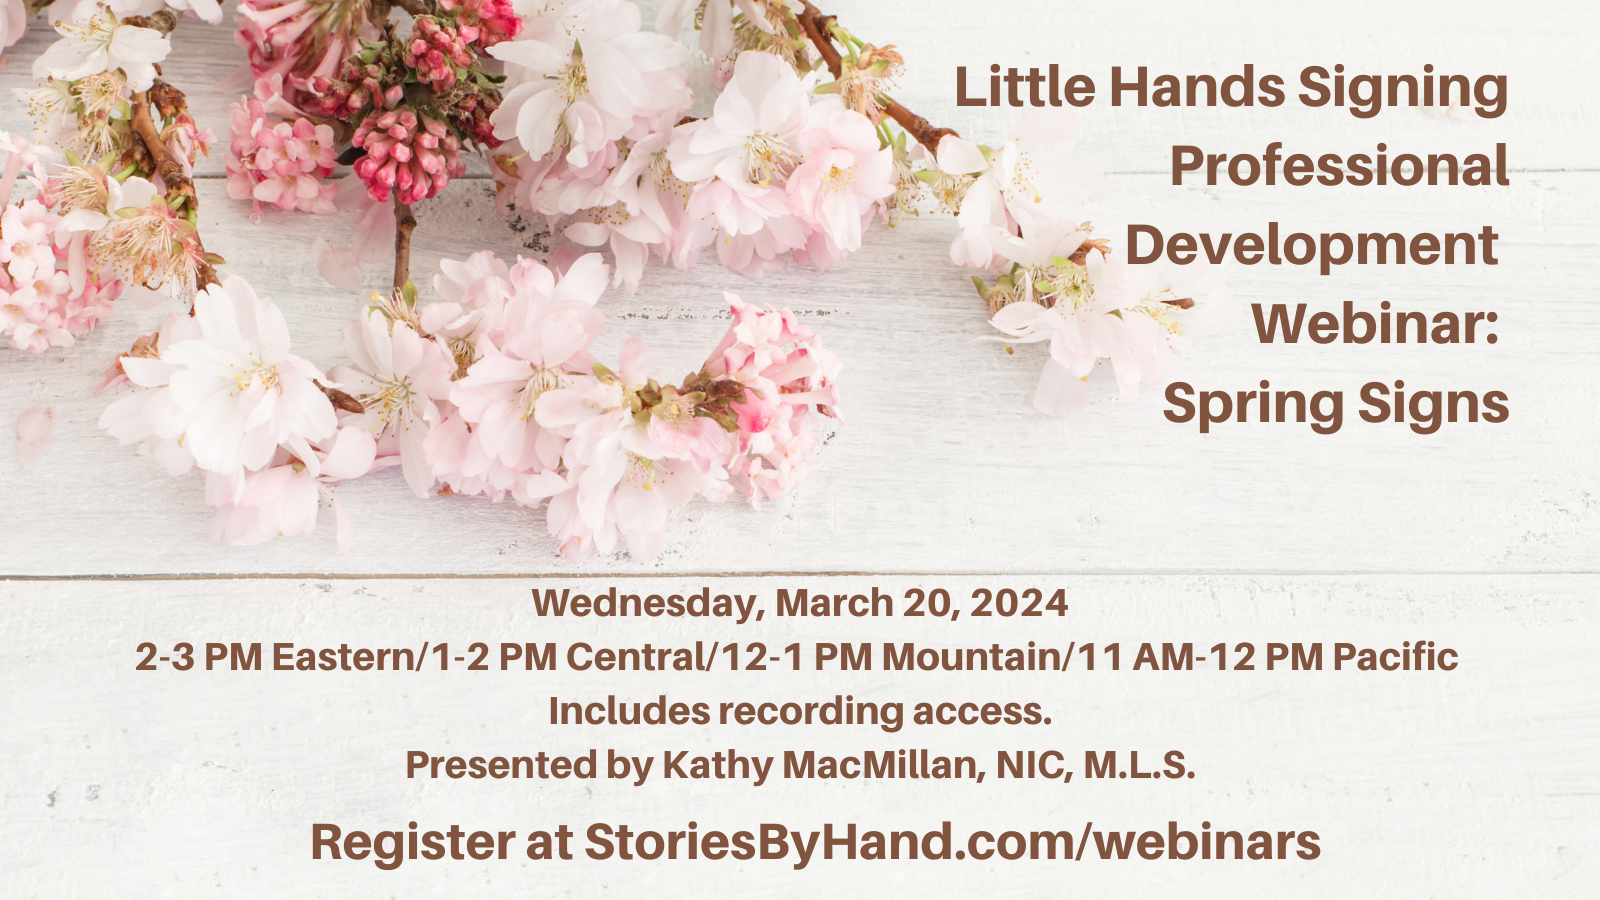 Pink and white flowers appear against a white painted background. Text reads: Little Hands Signing Professional Development: Spring Signs. Wednesday, March 20, 2024. 2-3 PM Eastern/1-2 PM Central/12-1 PM Mountain/11 AM-12 PM Pacific. Includes recording access. Presented by Kathy MacMillan, NIC, M.L.S. StoriesByHand.com/webinars.